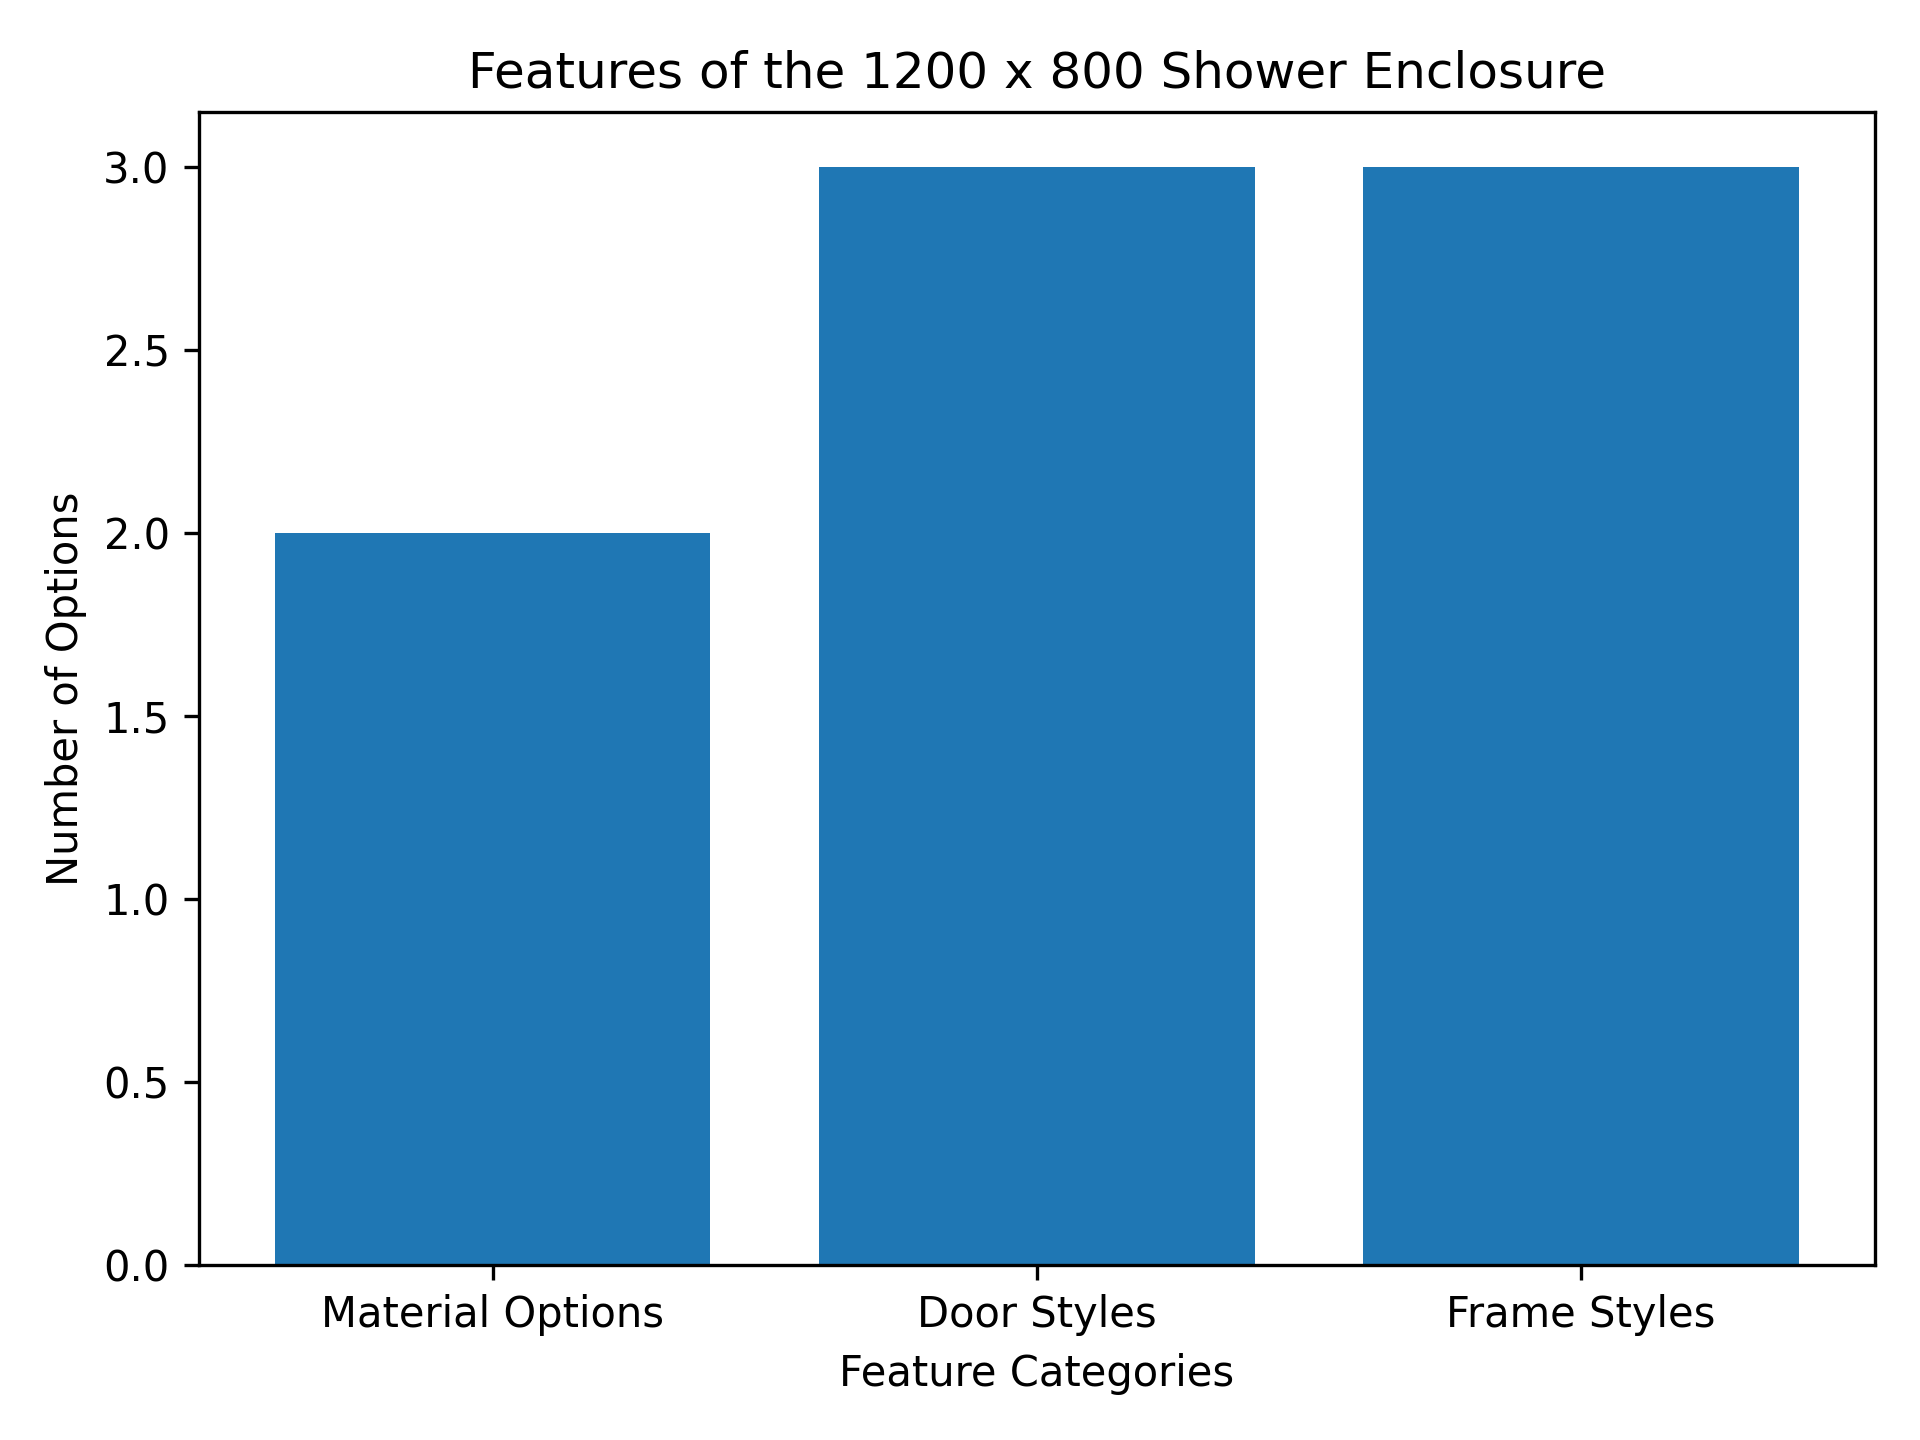 Features of the 1200 x 800 Shower Enclosure